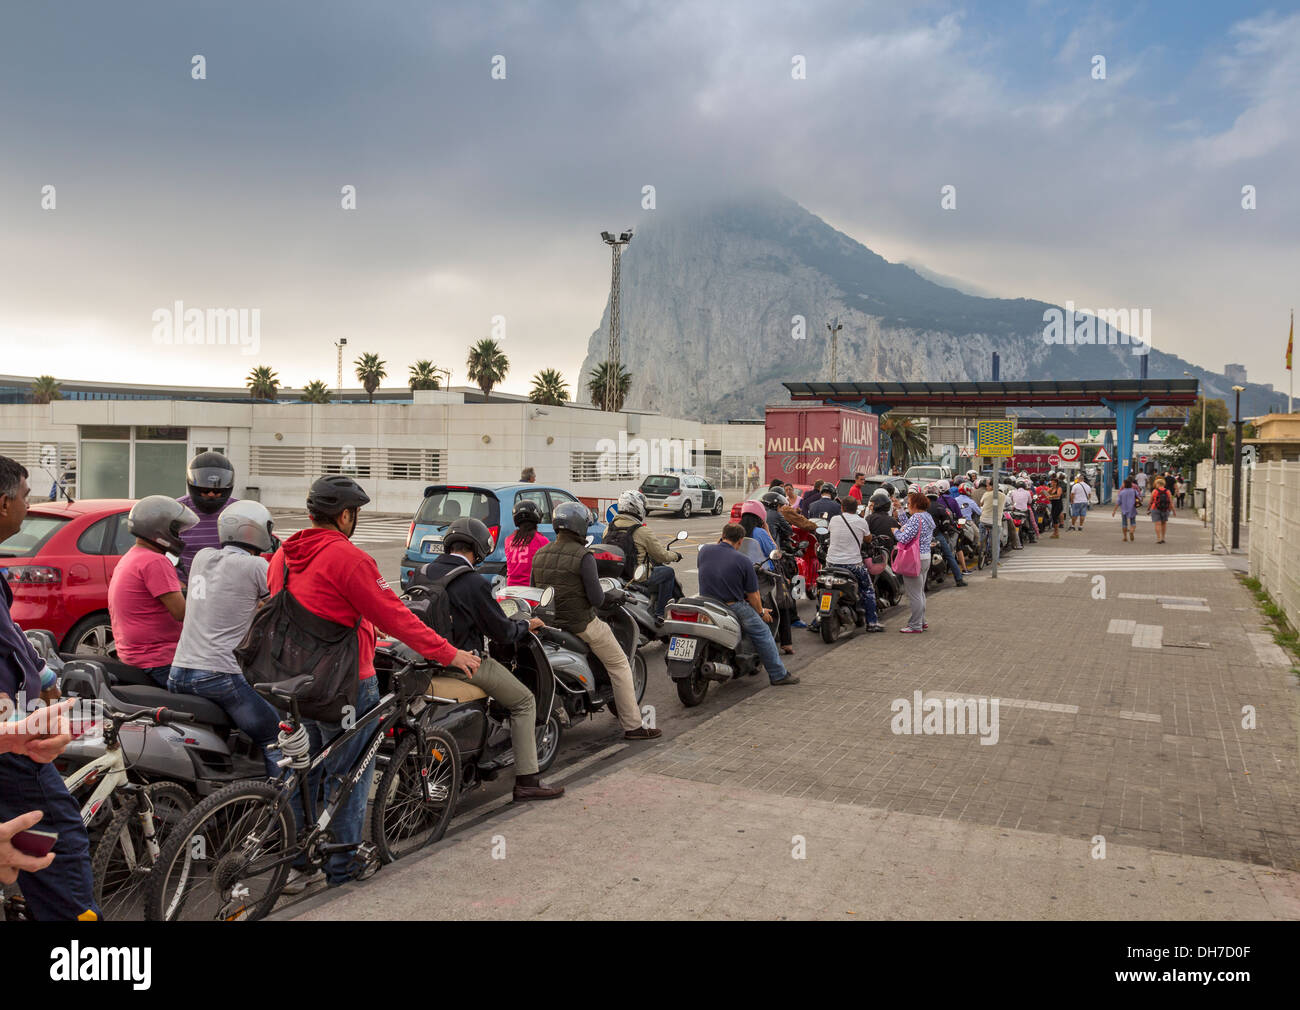 BORDER CROSSING FROM  LA LINEA SPAIN INTO GIBRALTAR  A TRAFFIC QUEUE WITH THE  ROCK IN THE BACKGROUND Stock Photo